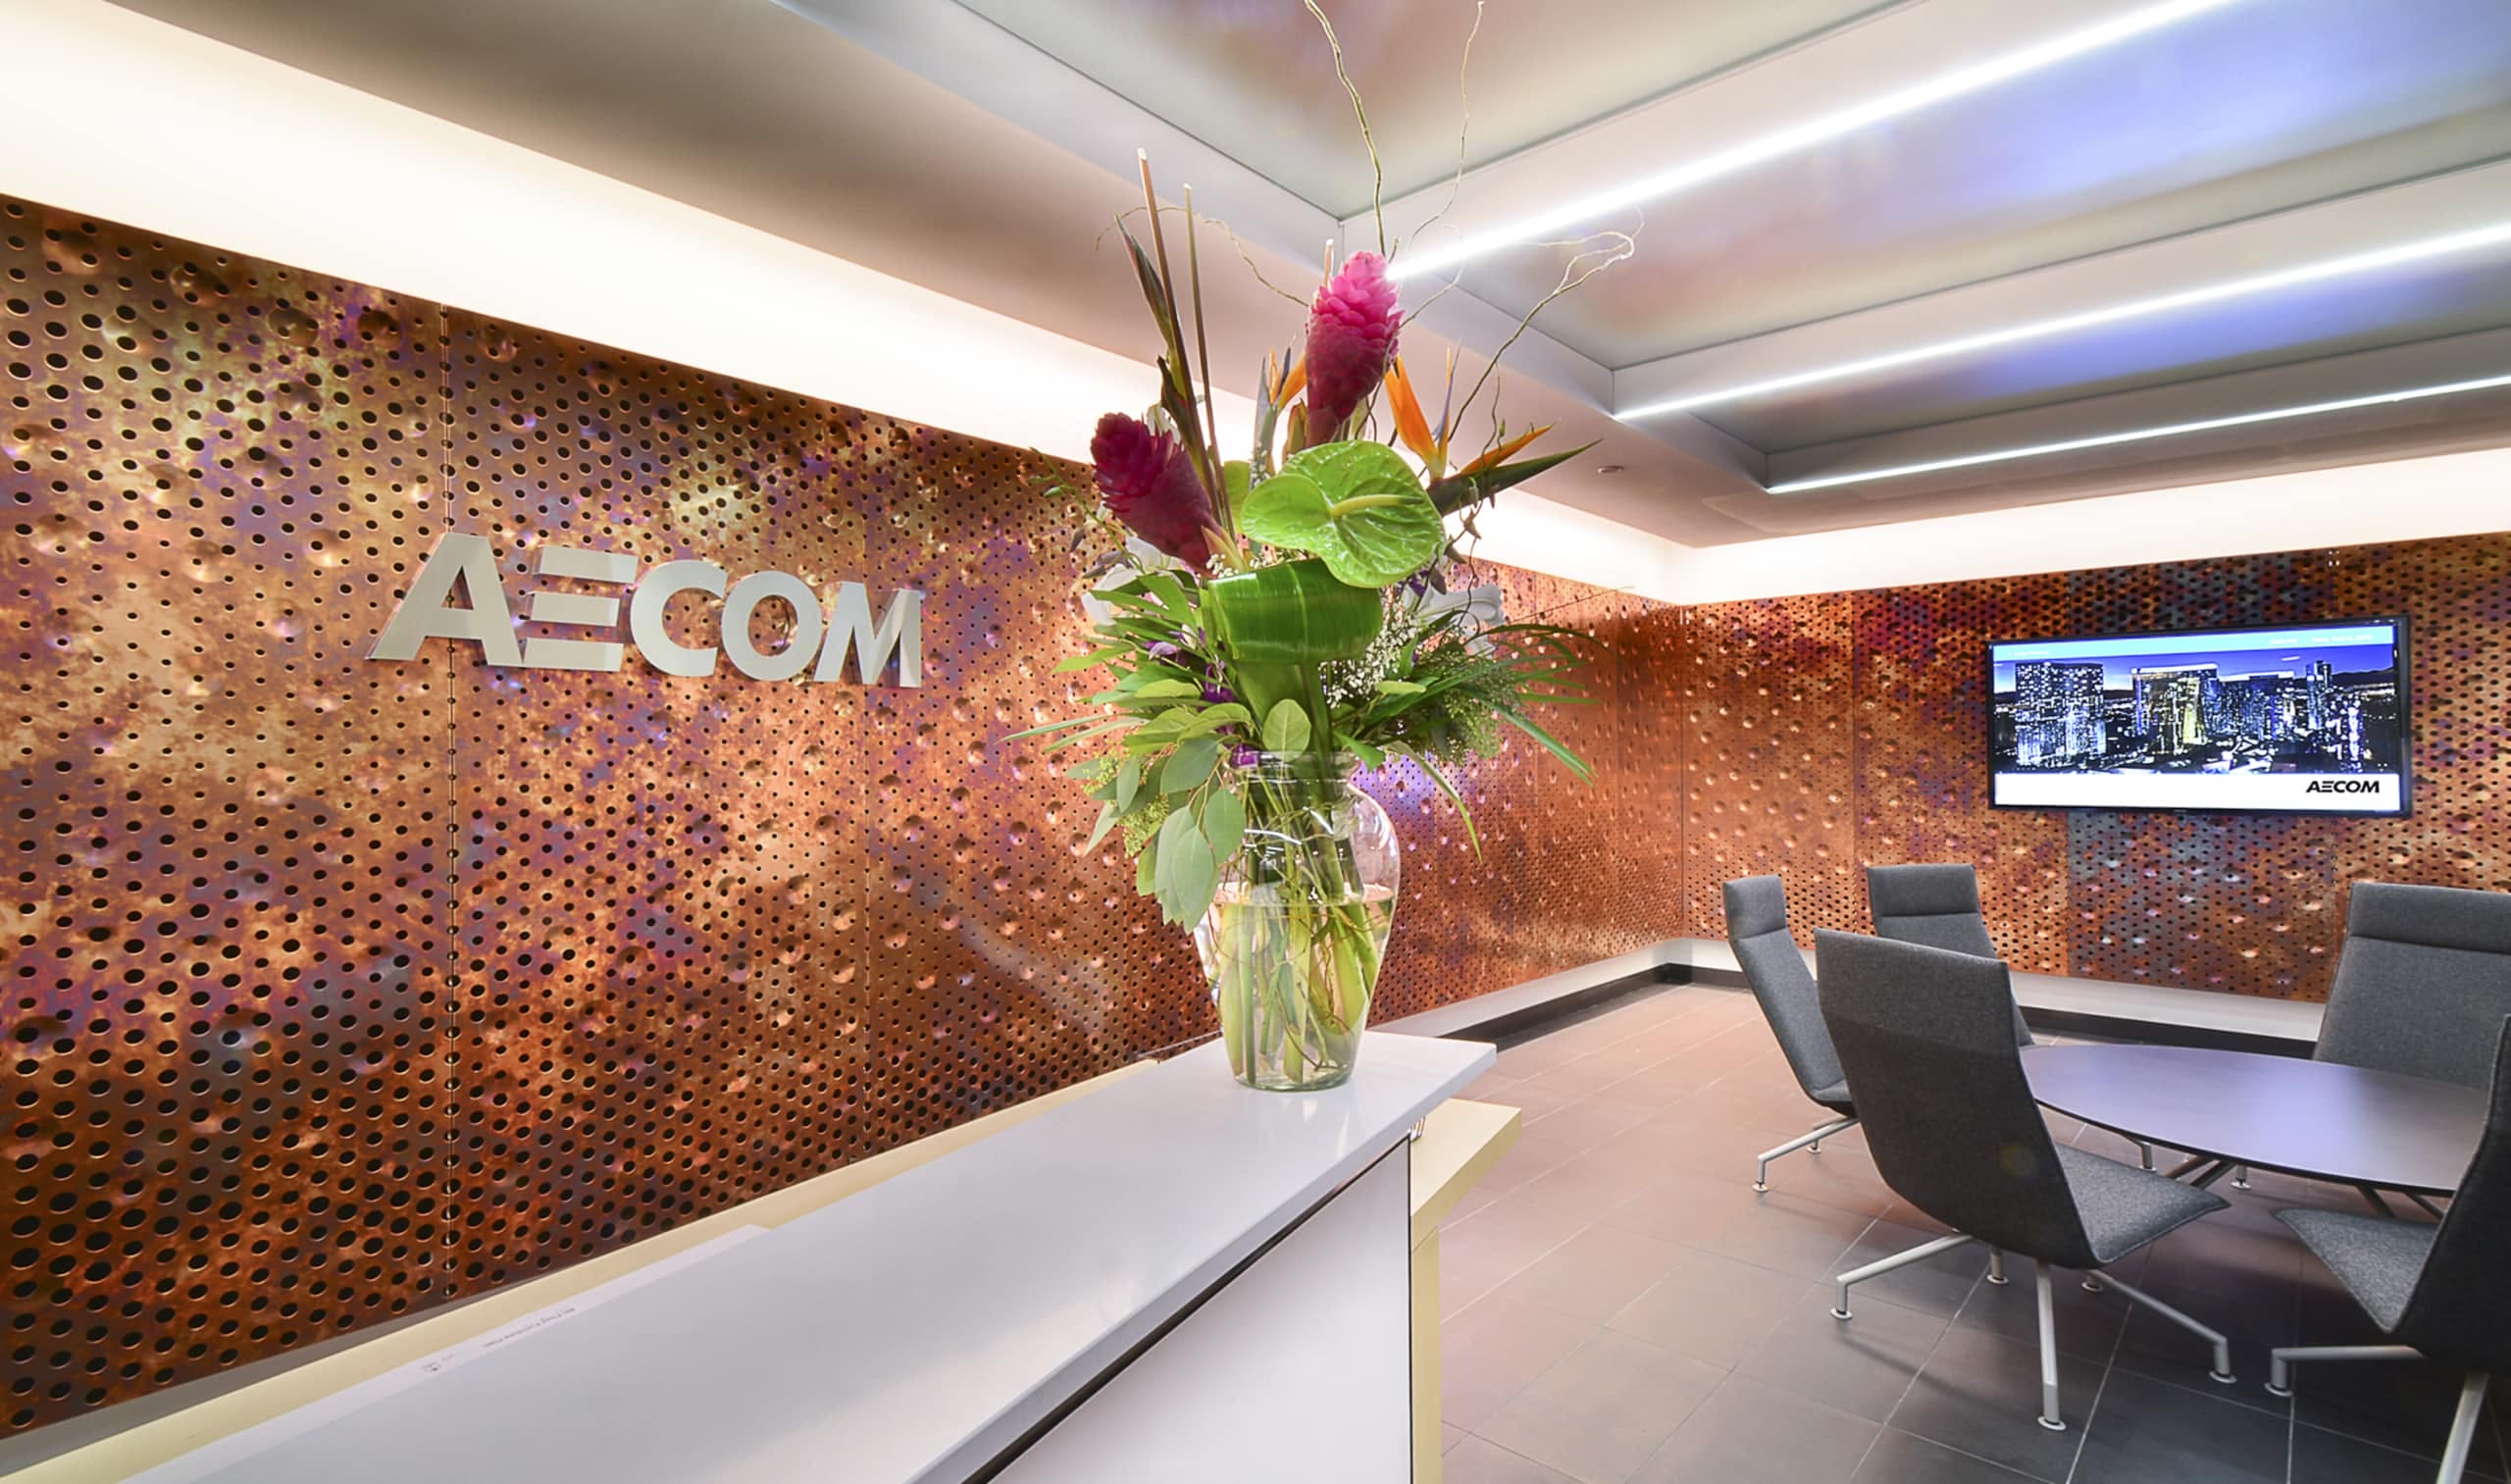 AECOM Reception area at the Cleveland office